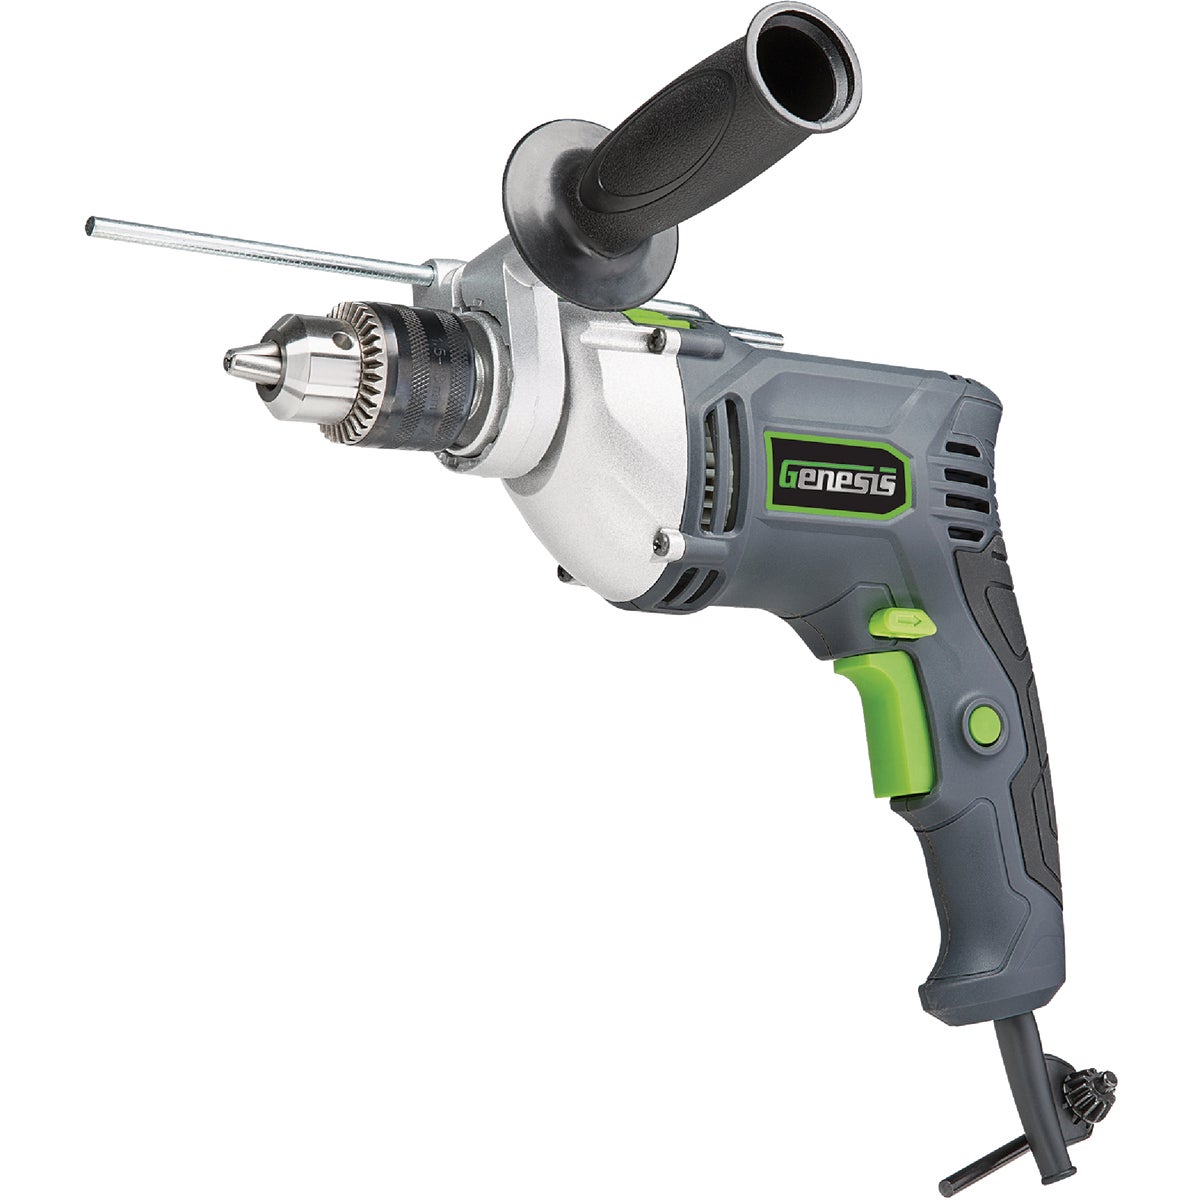 Genesis 7.5A 1/2 In. Electric Hammer Drill